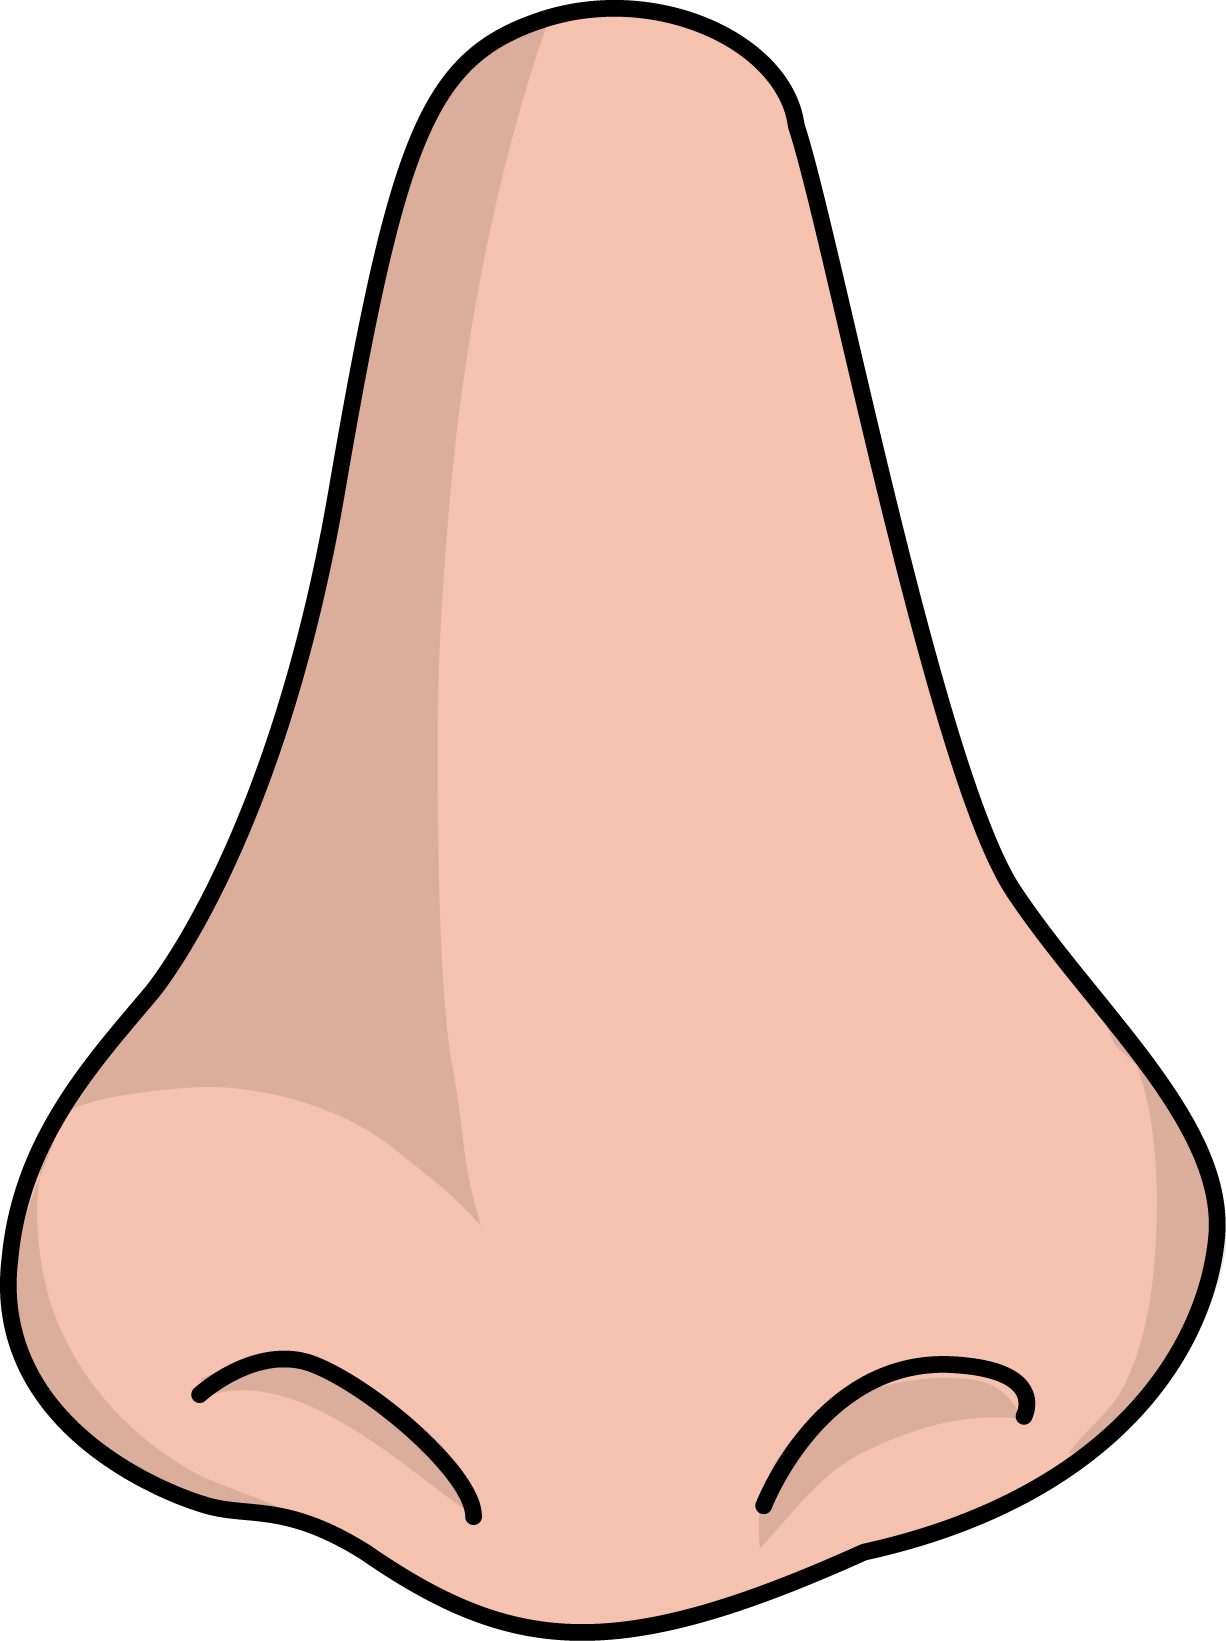 Free Long Nose Cliparts Download Free Clip Art Free Clip Art On Clipart Library Clipart craft(cc) provides you with free nose clipart cliparts. clipart library